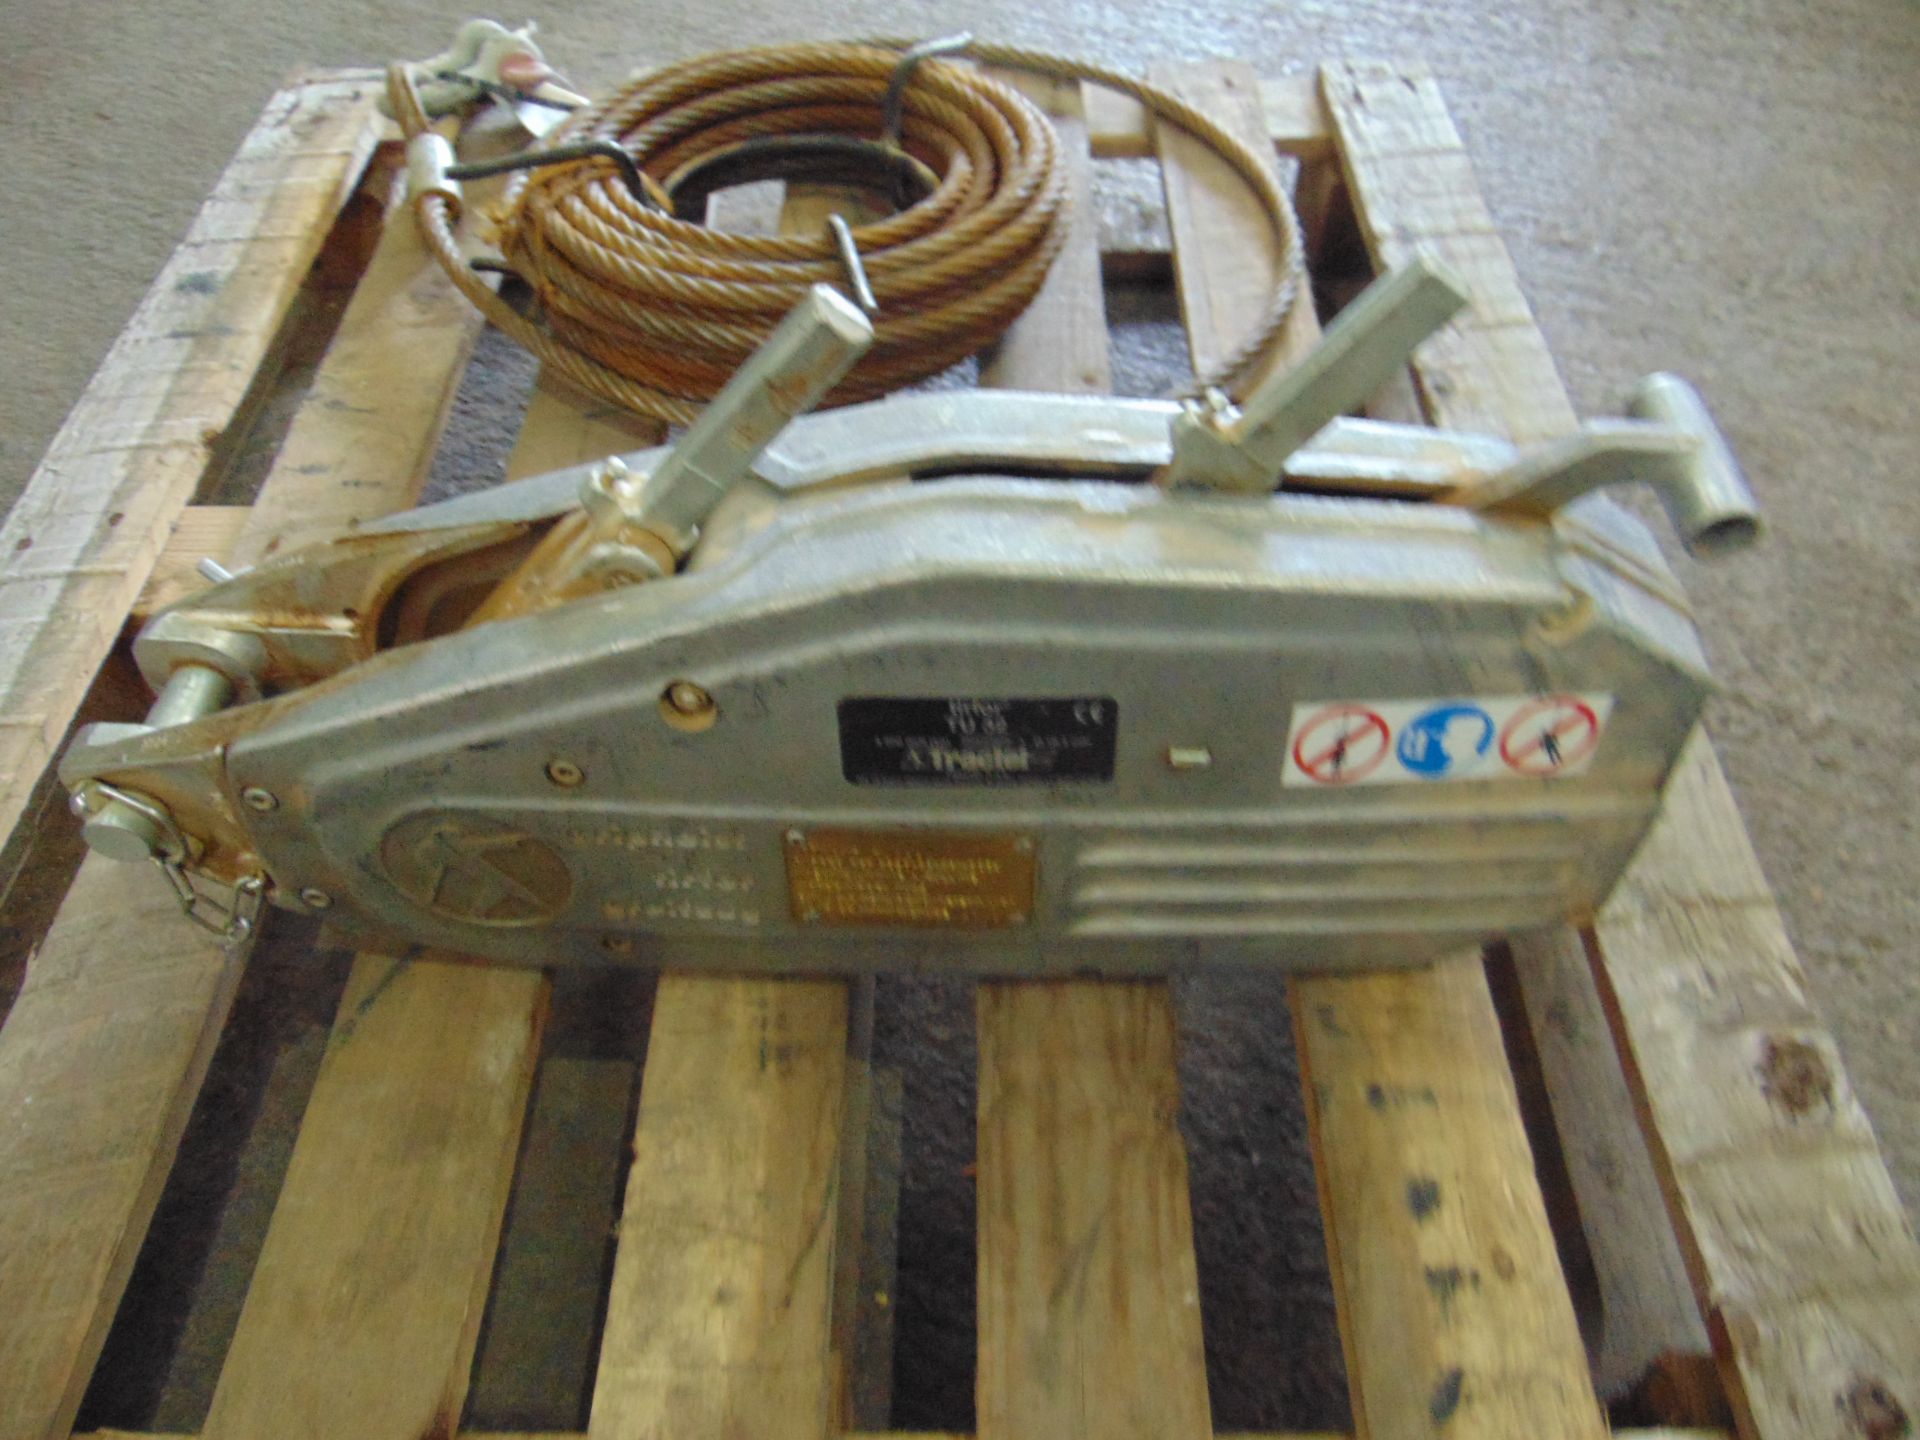 TRACTEL TU32 TIRFOR WINCH WITH WINCH ROPE - Image 8 of 8